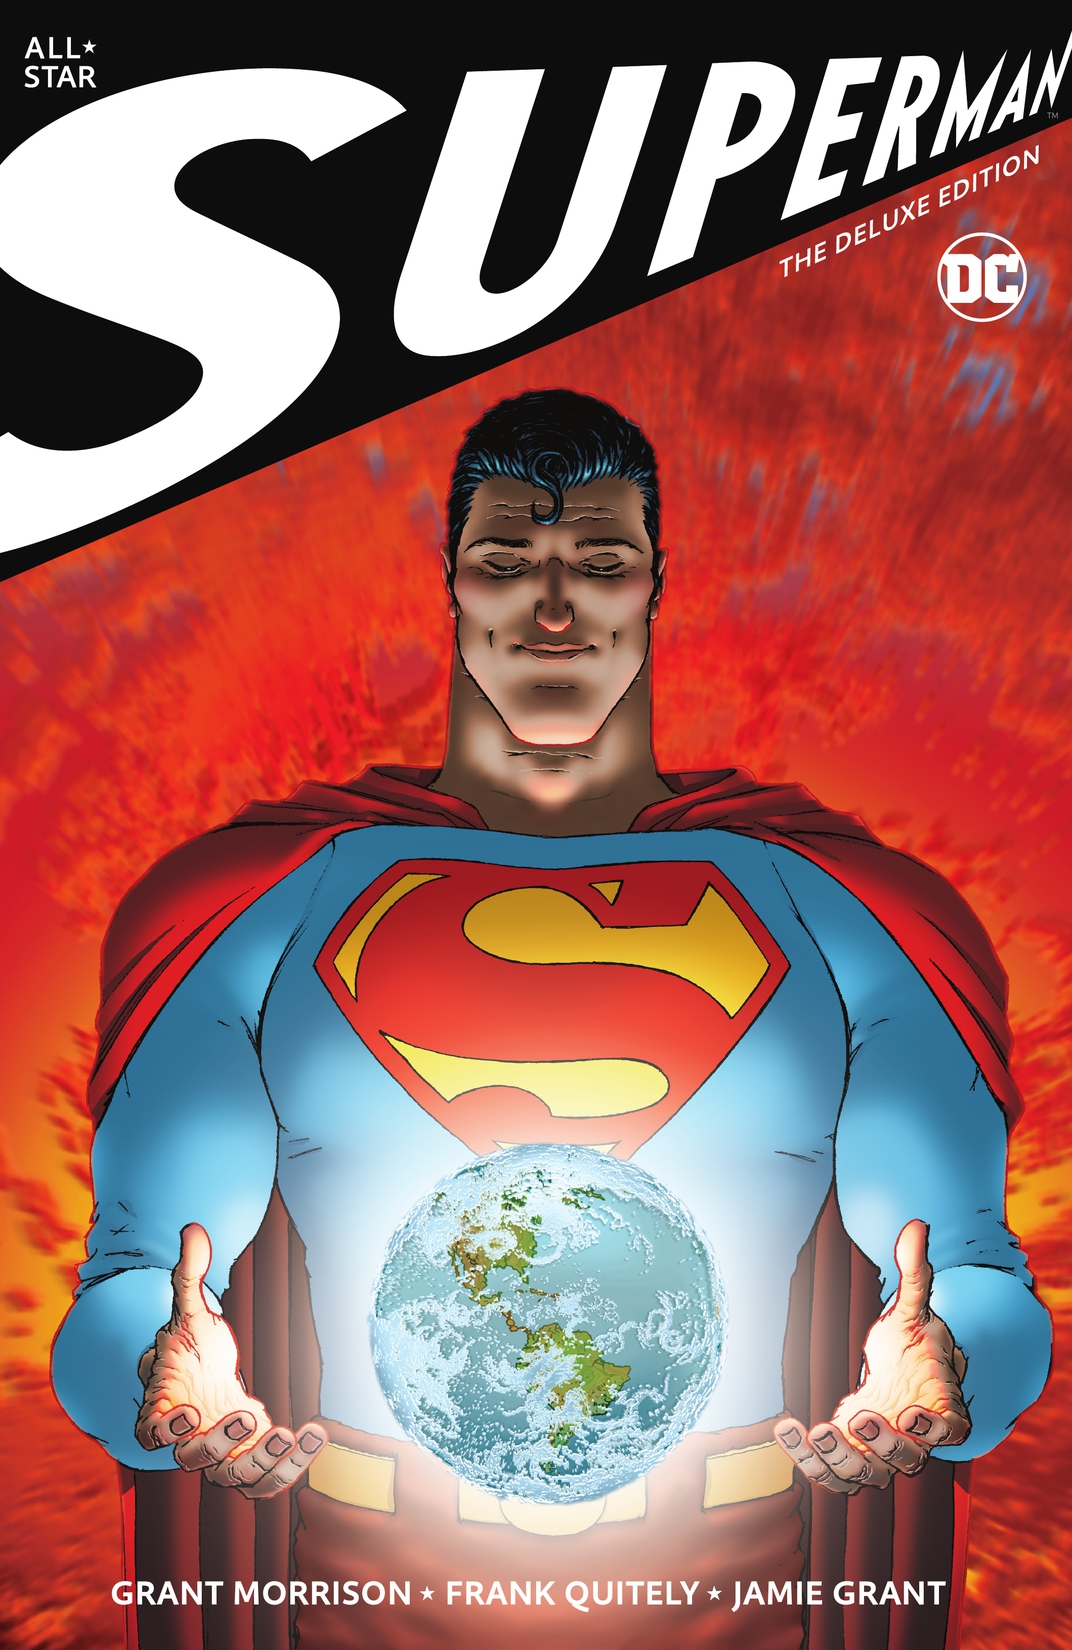 All Star Superman: The Deluxe Edition preview images